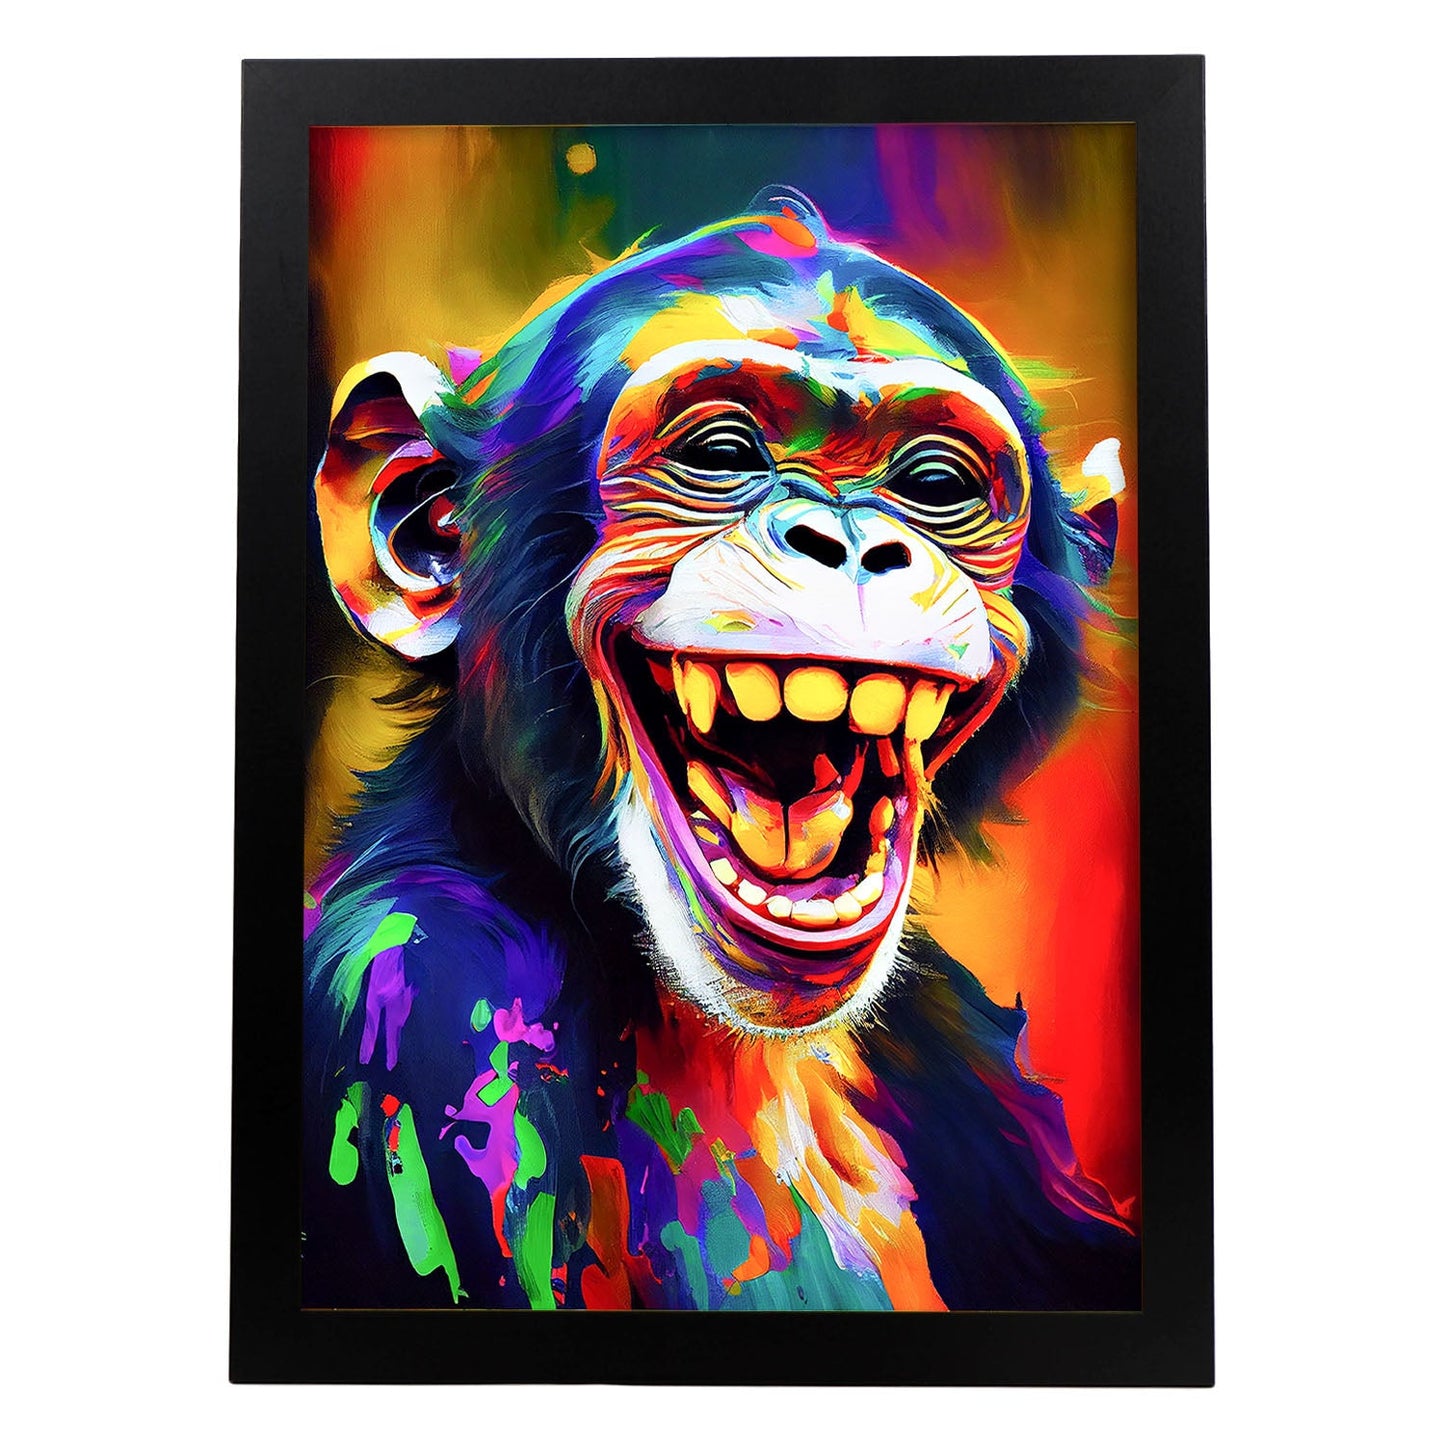 Nacnic Abstract smiling Monkey in Lisa Fran Style. Aesthetic Wall Art Prints for Bedroom or Living Room Design.